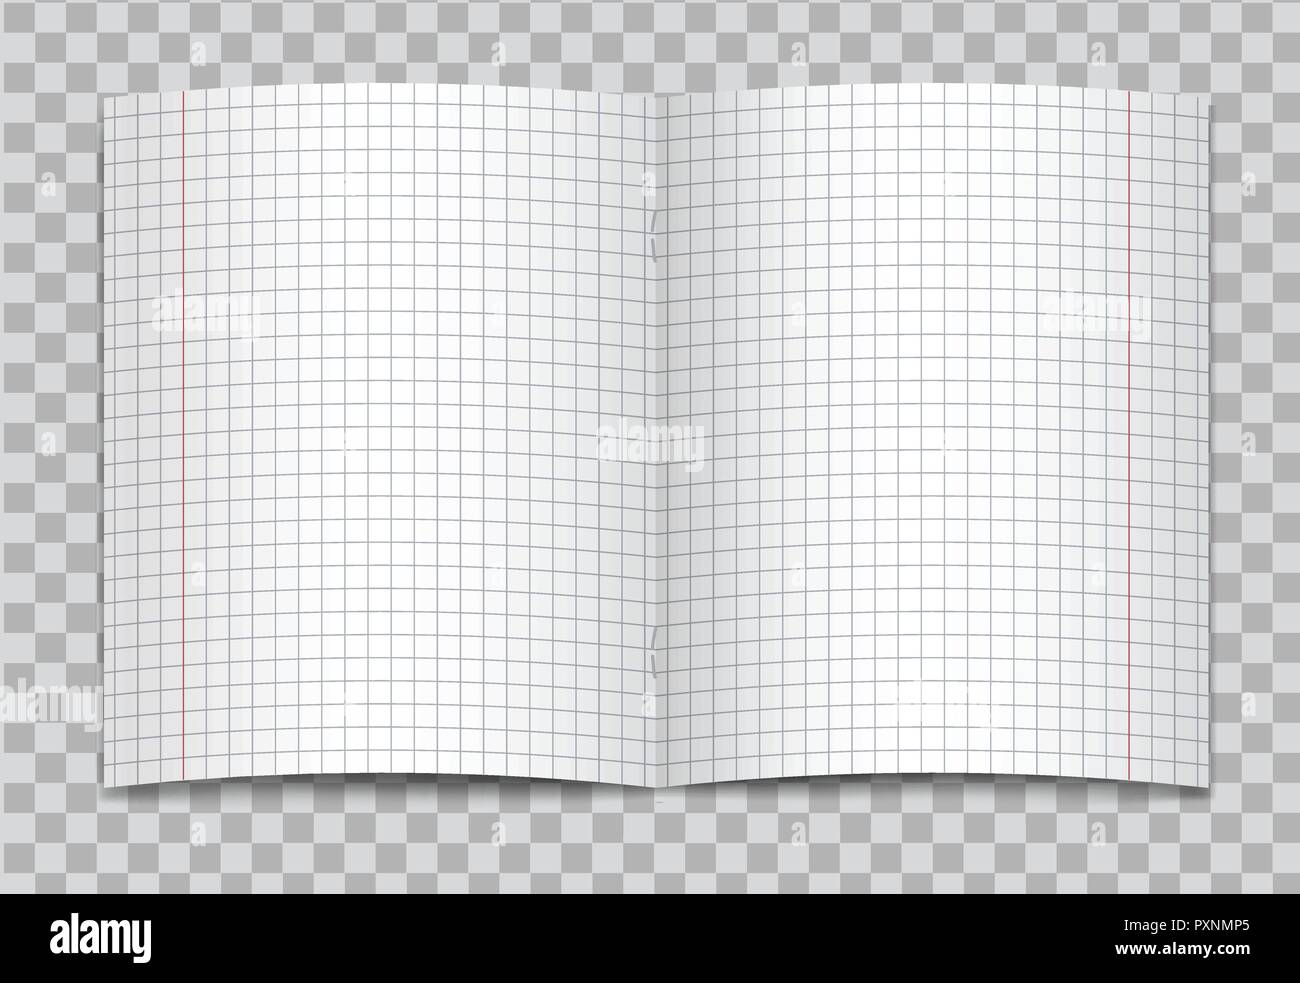 Vector opened realistic squared elementary school copybook with red margins on transparent background. Mockup or template of blank graphed opened page Stock Vector